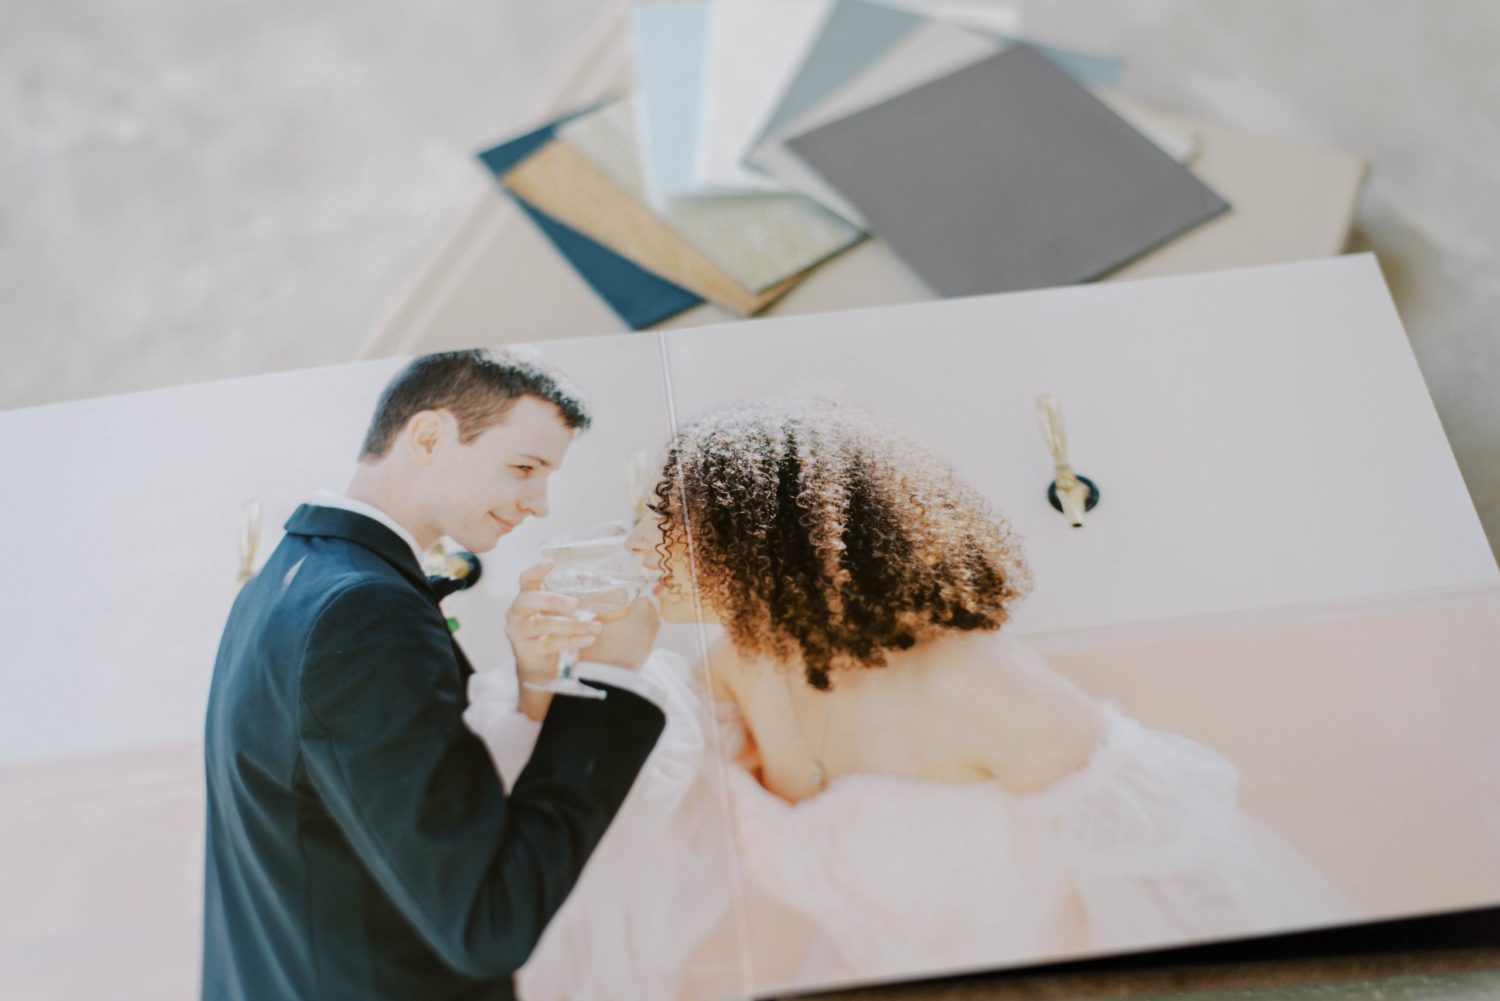 Why you need a wedding album Wedding photo book wedding family blush leather cover photo album and distressed leather brown album with colored swatches heirloom album spread open